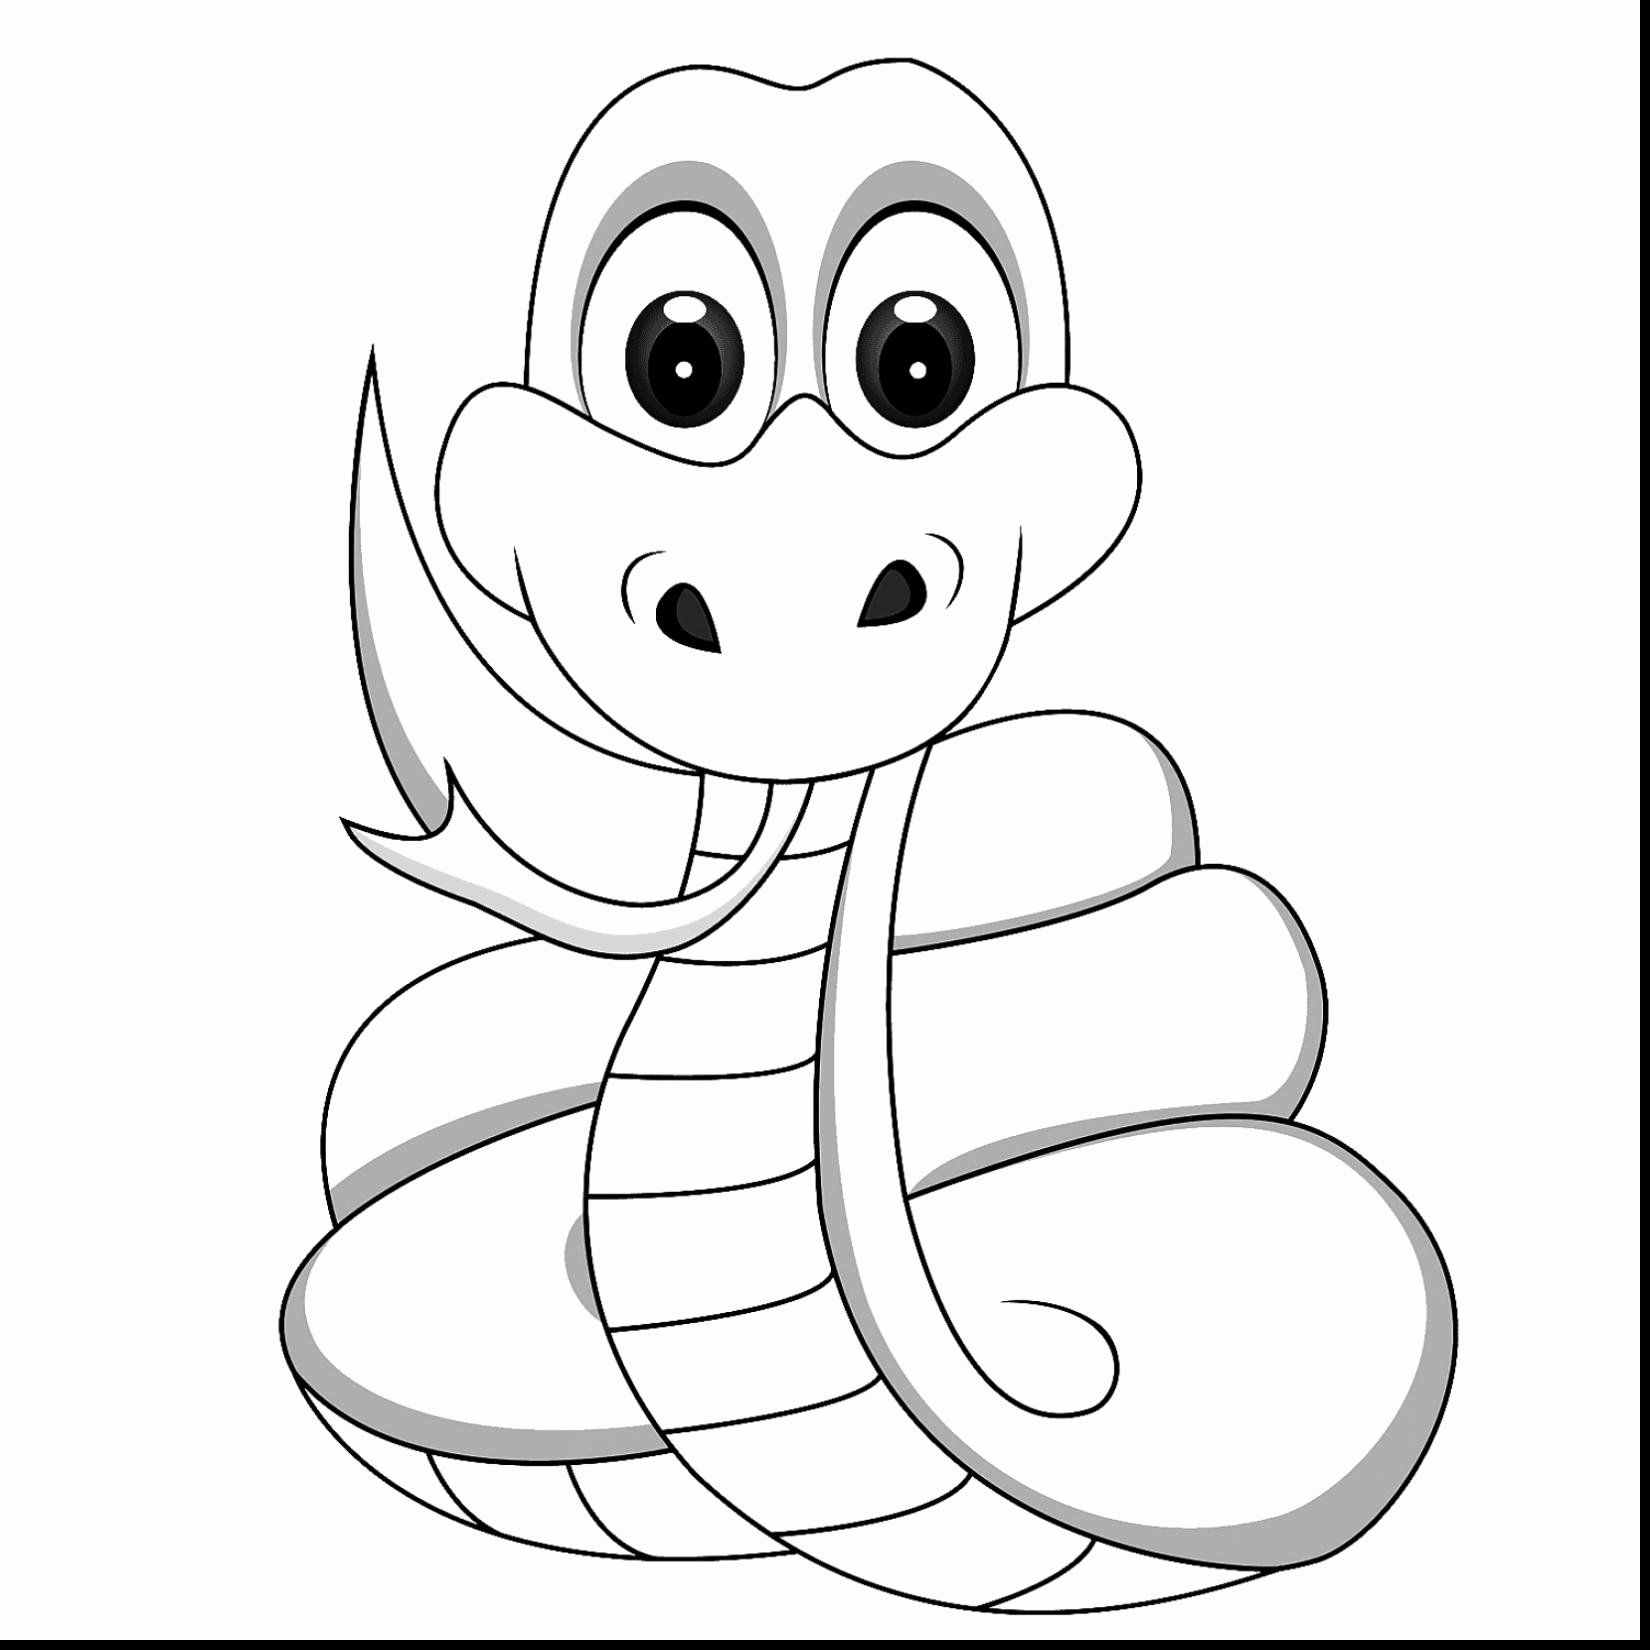 Booba Coloring Pages - Coloring Home